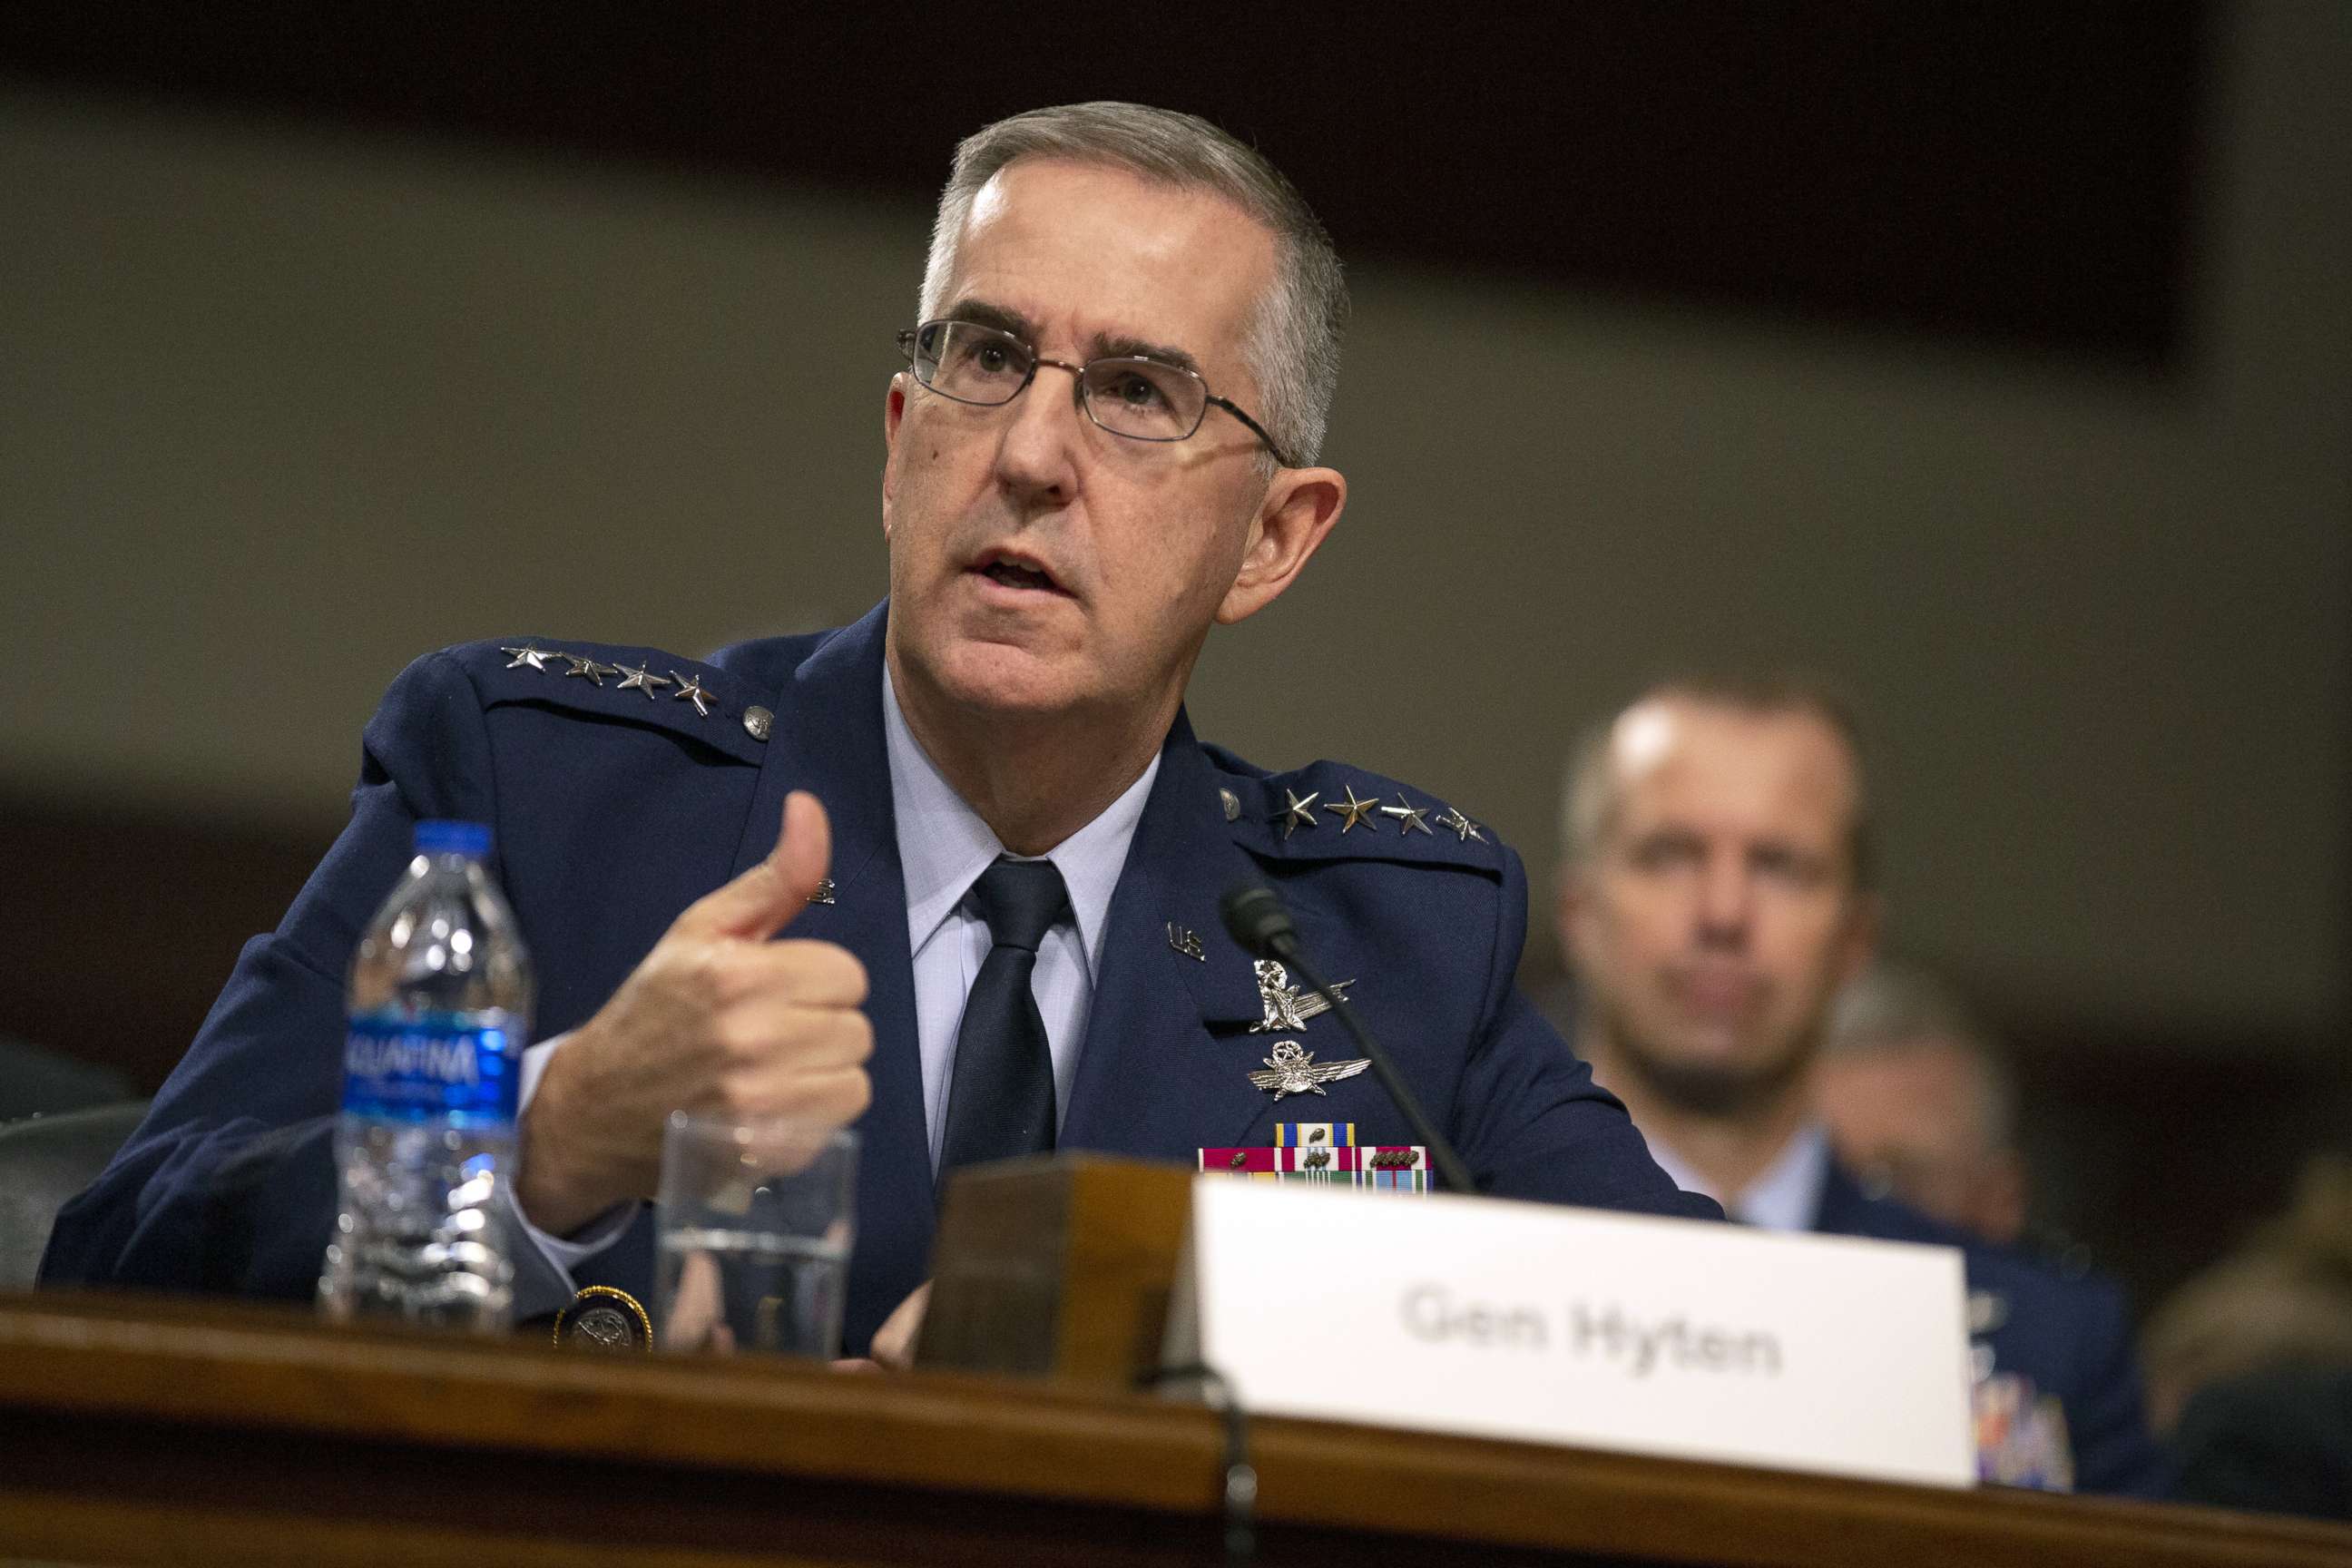 PHOTO: General John Hyten, commander of U.S. Strategic Command, listens during a Senate Armed Services Committee hearing in Washington, D.C., on Thursday, April 11, 2019.